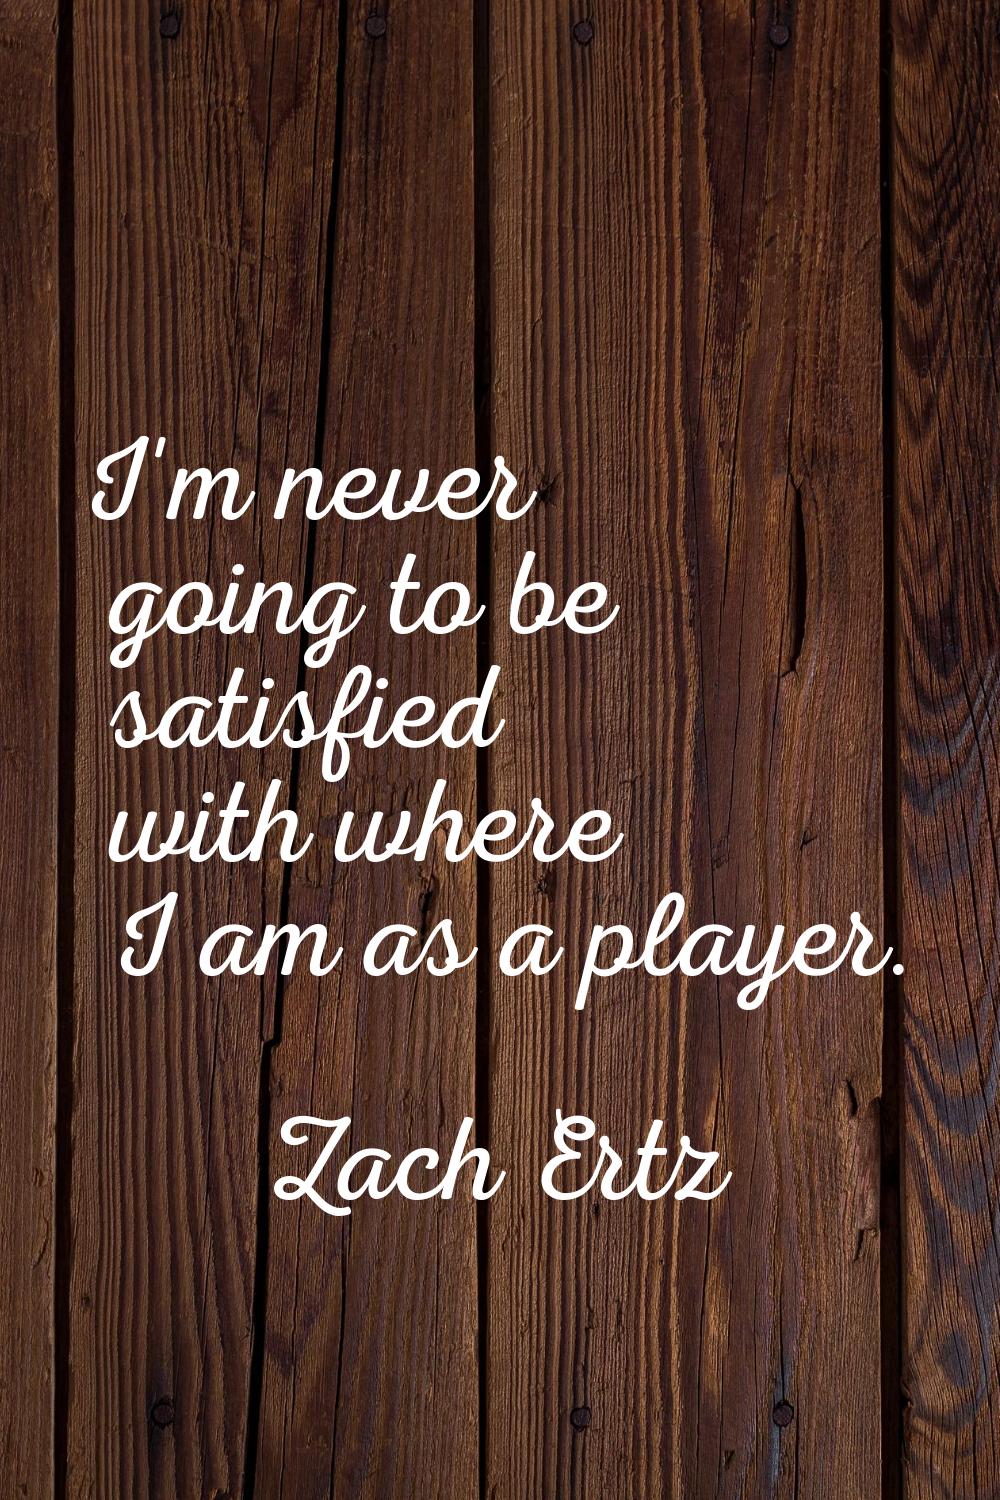 I'm never going to be satisfied with where I am as a player.